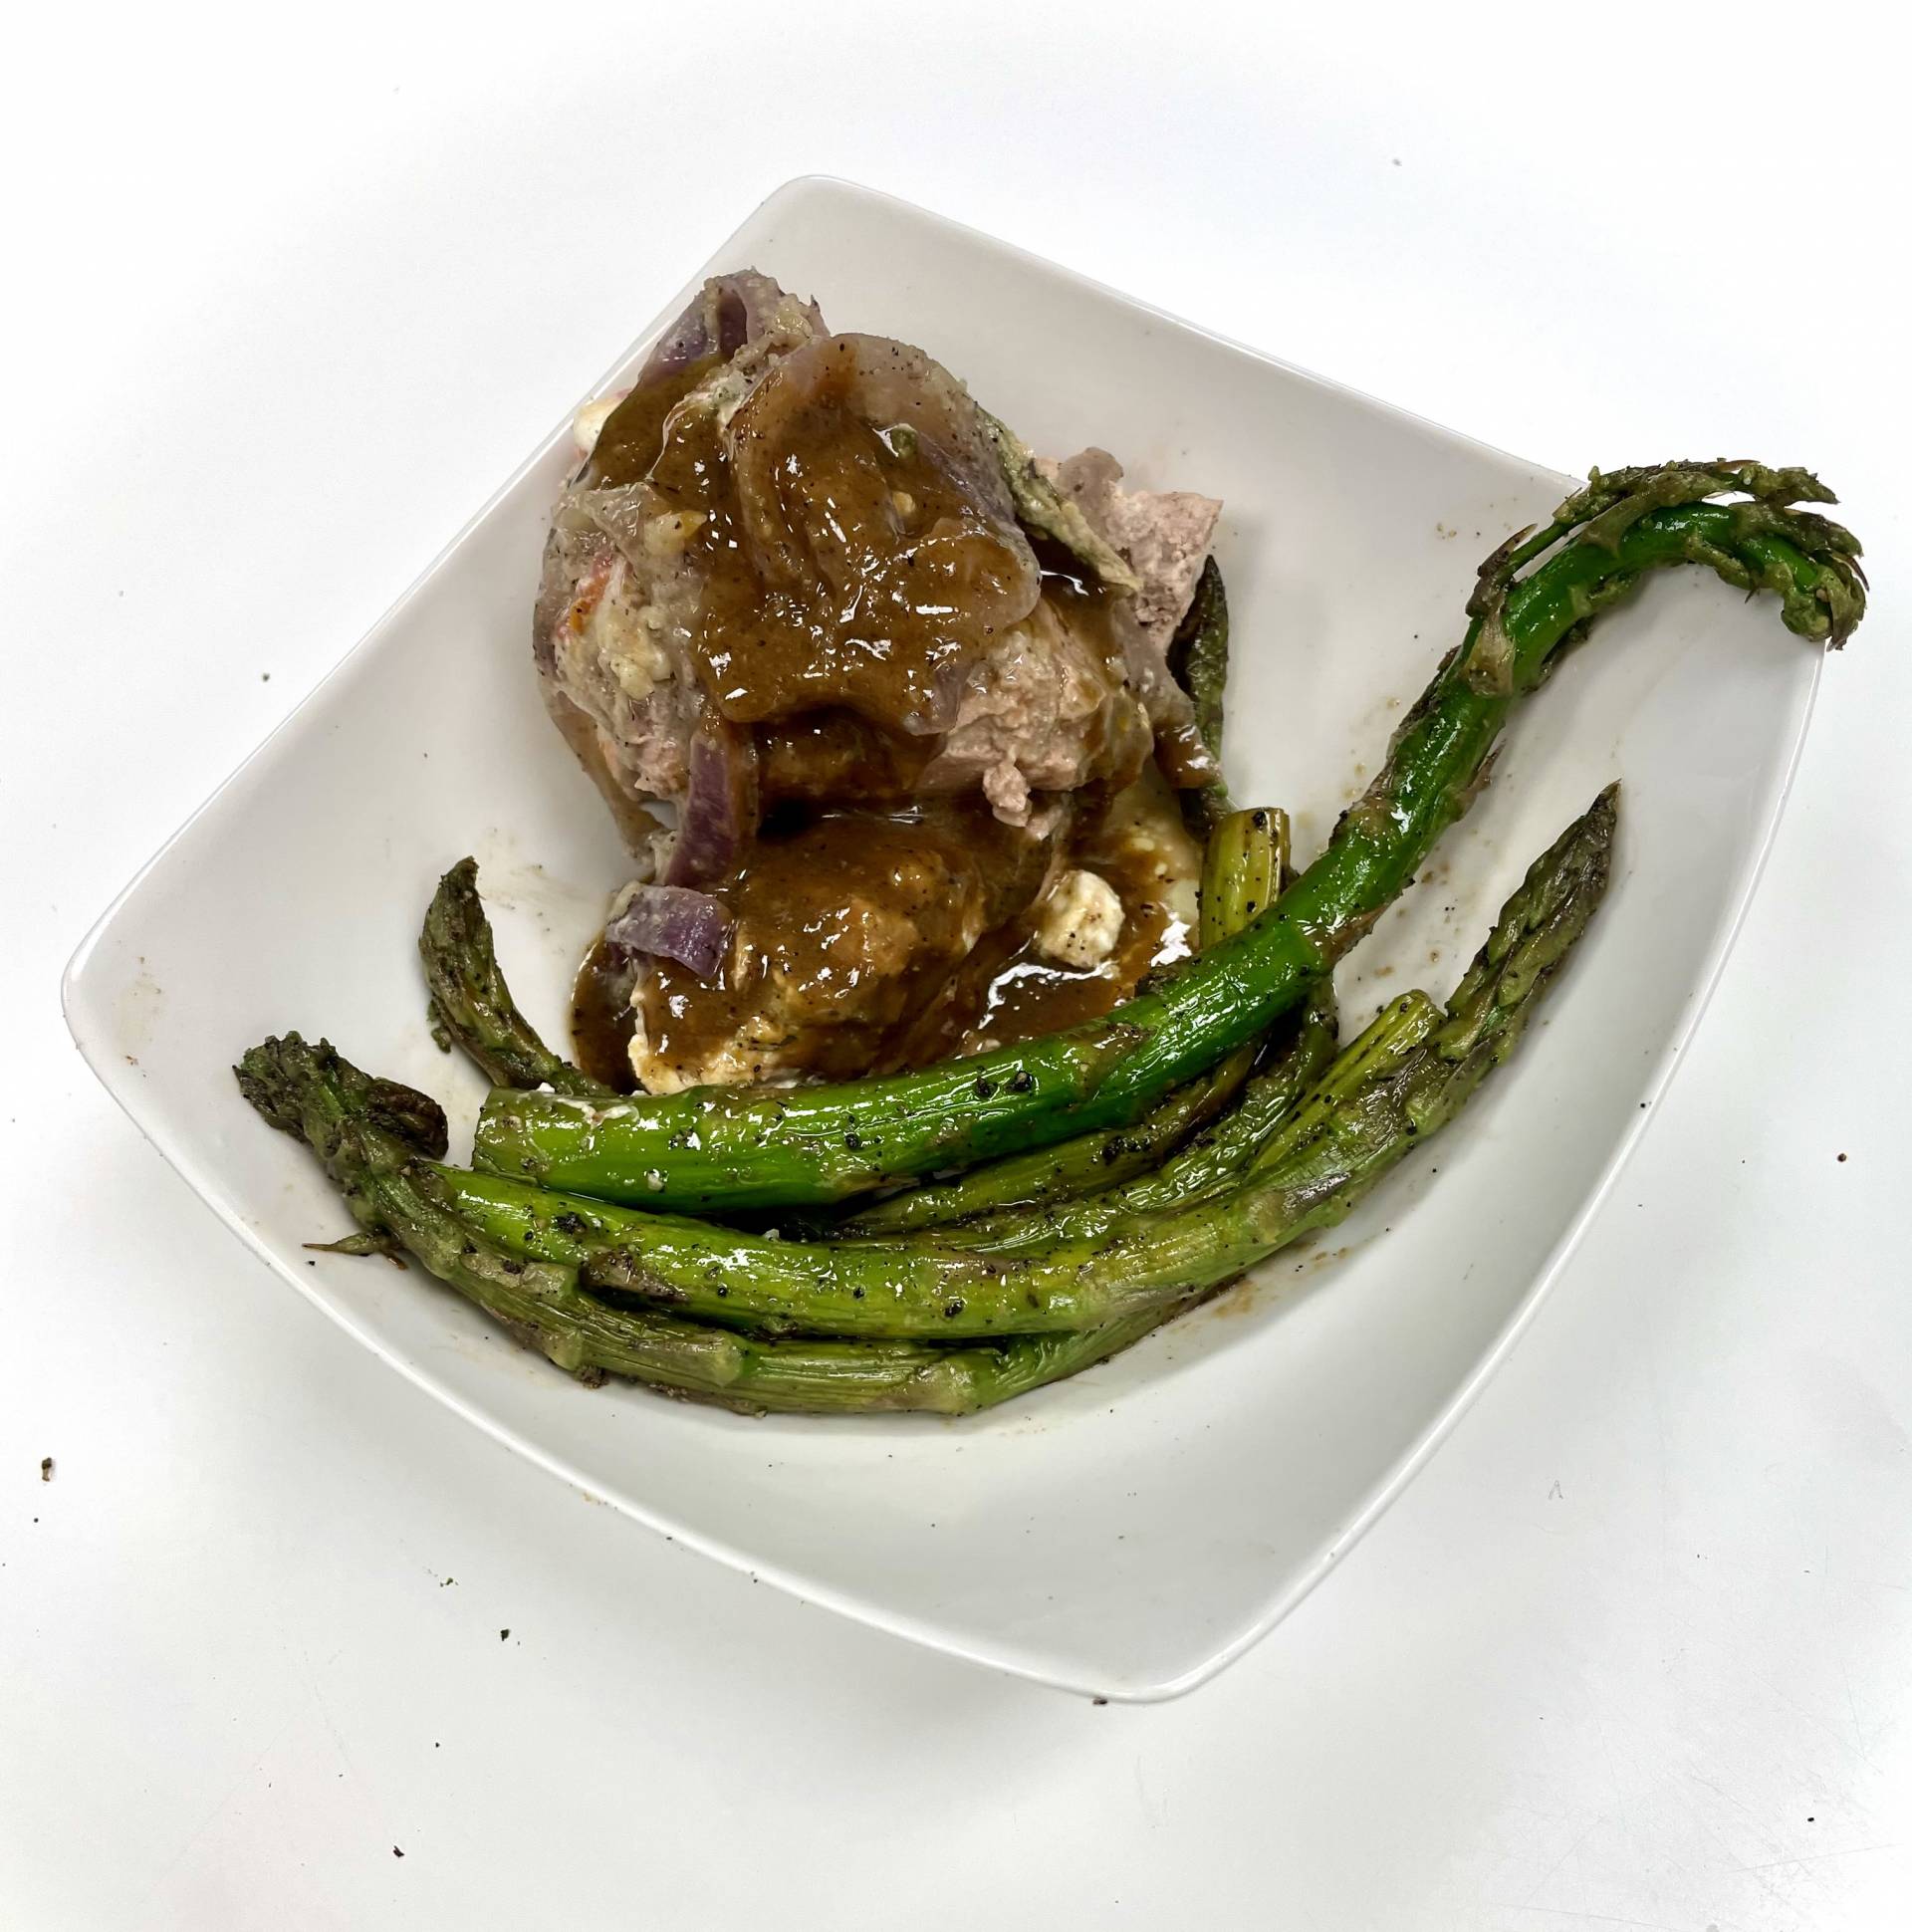 Stuffed Pork Loin with Caramelized Onions and Asparagus - Keto